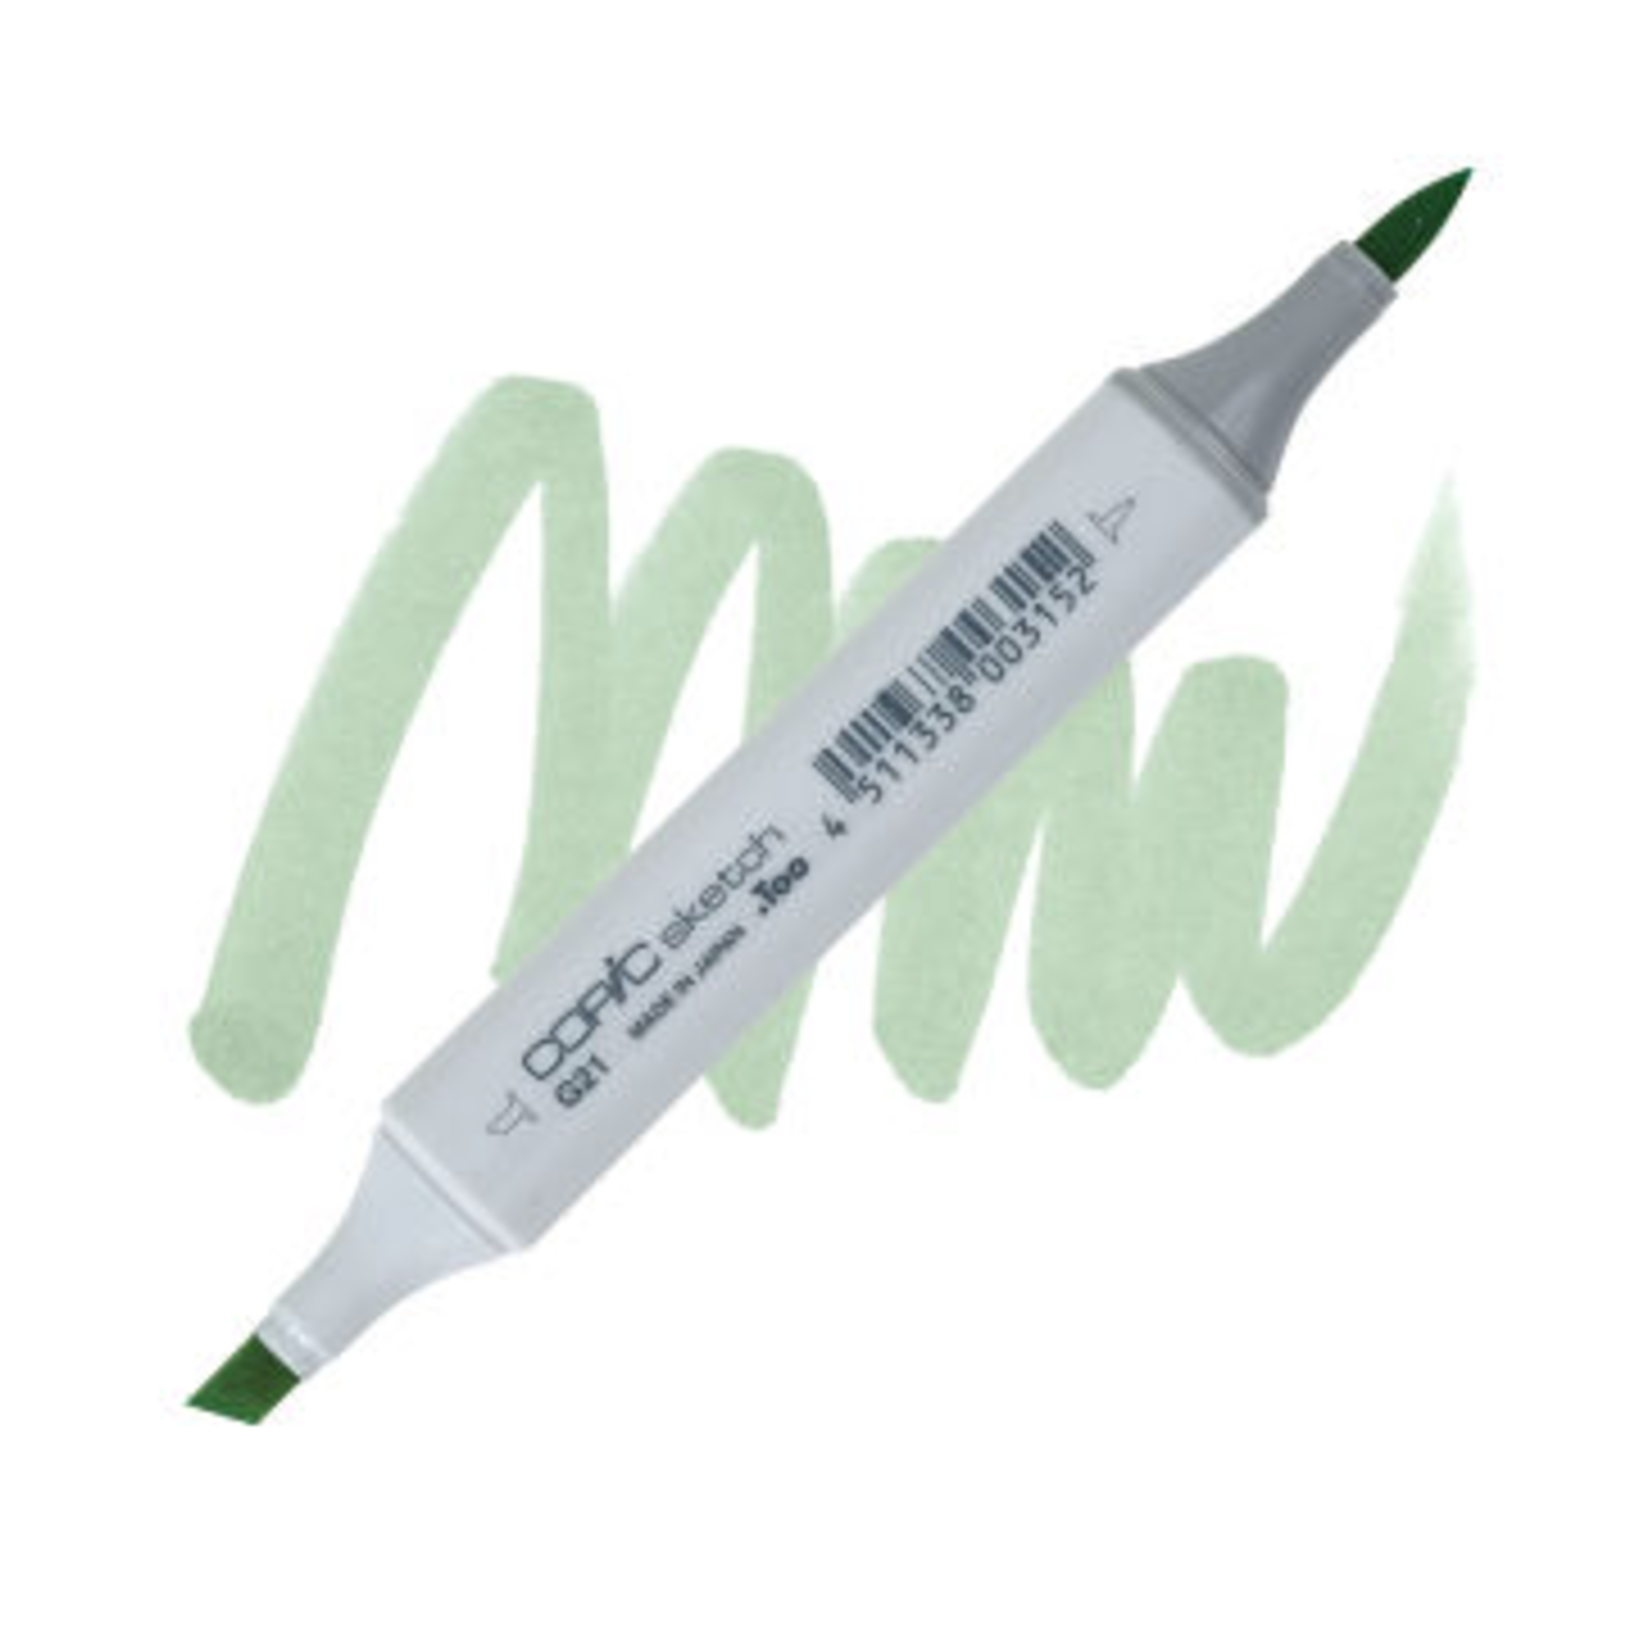 Copic Copic Marker G21 - Lime Green